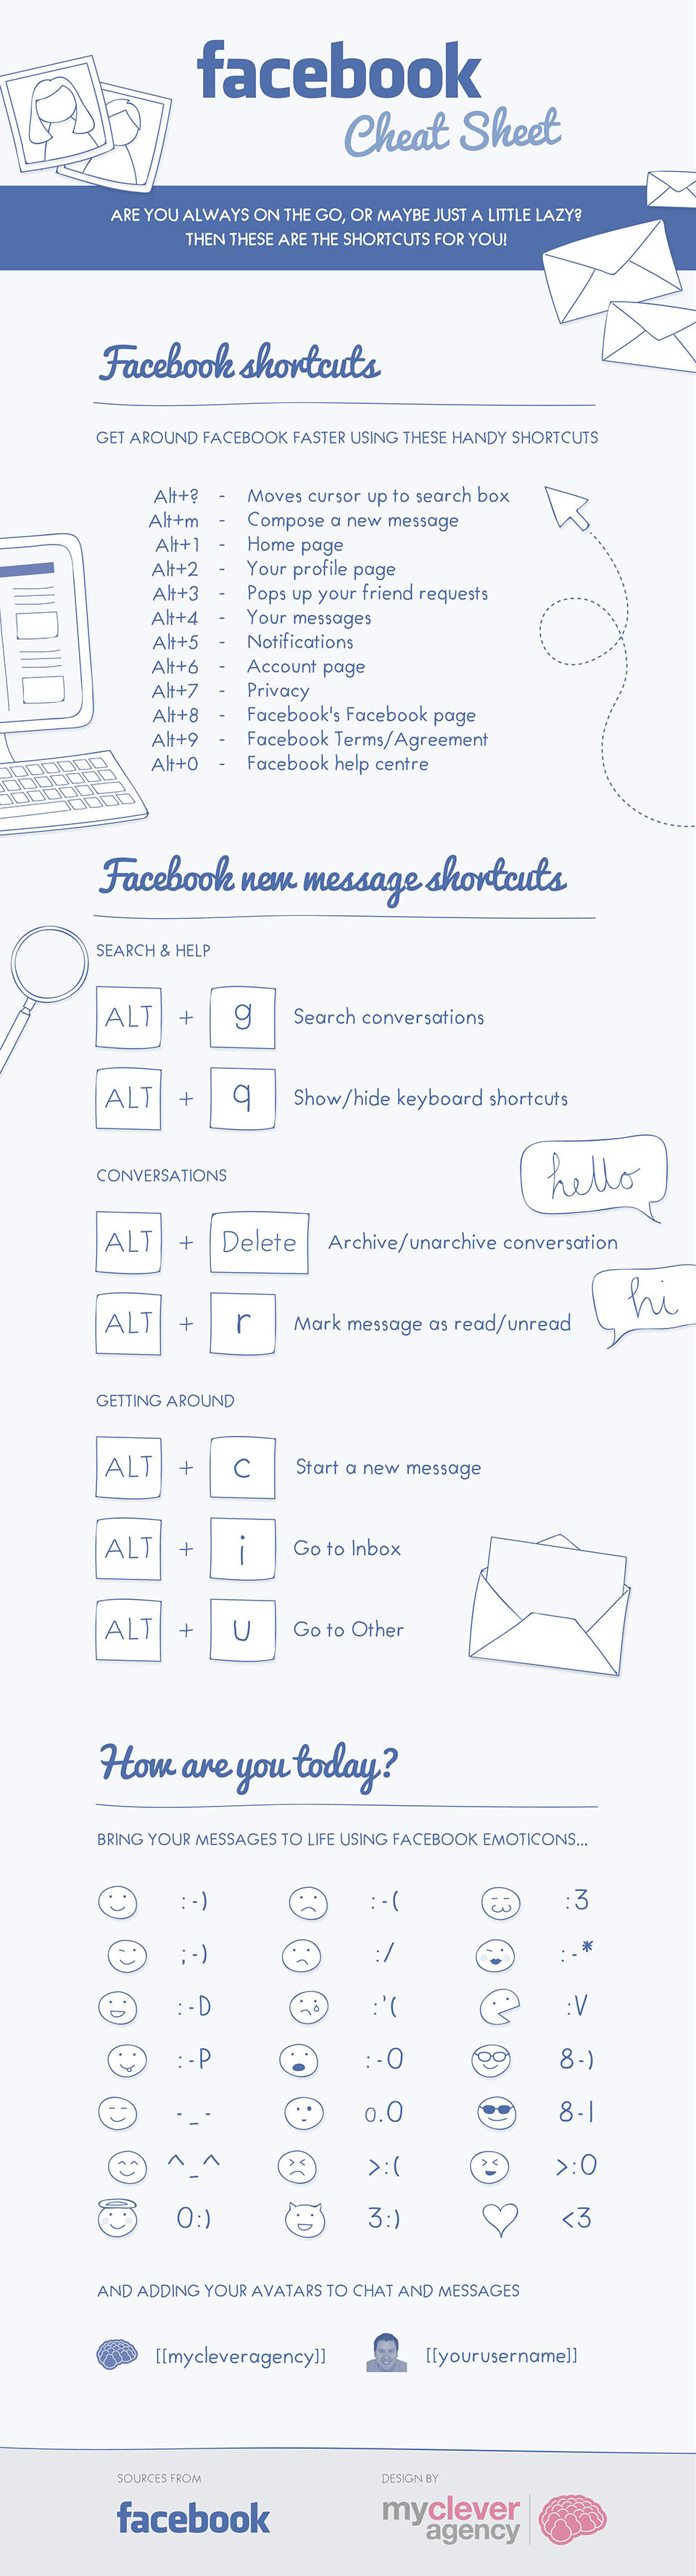 facebook shortcuts infographic